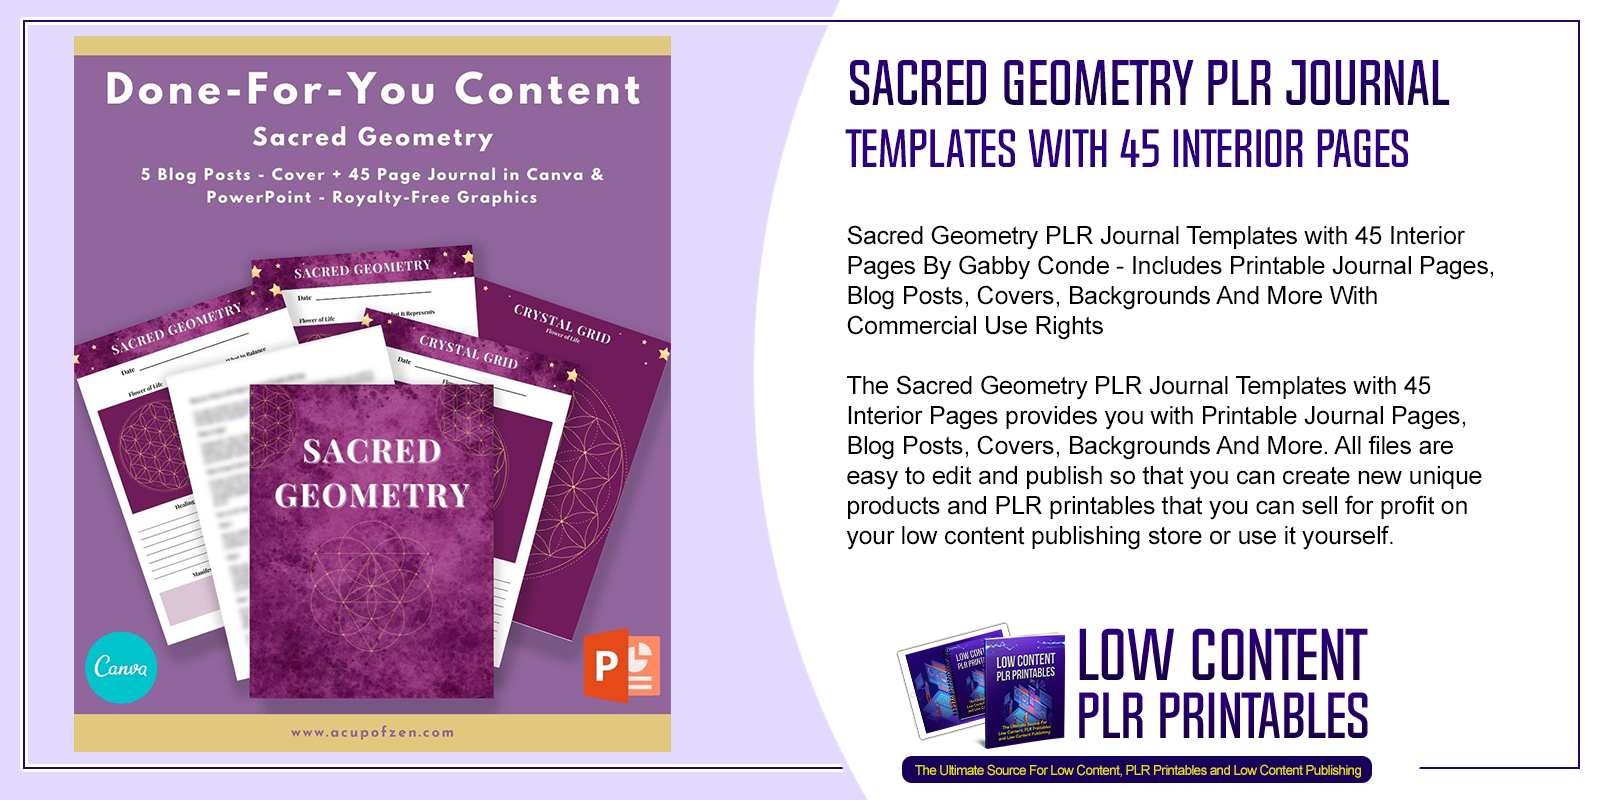 Sacred Geometry PLR Journal Templates with 45 Interior Pages